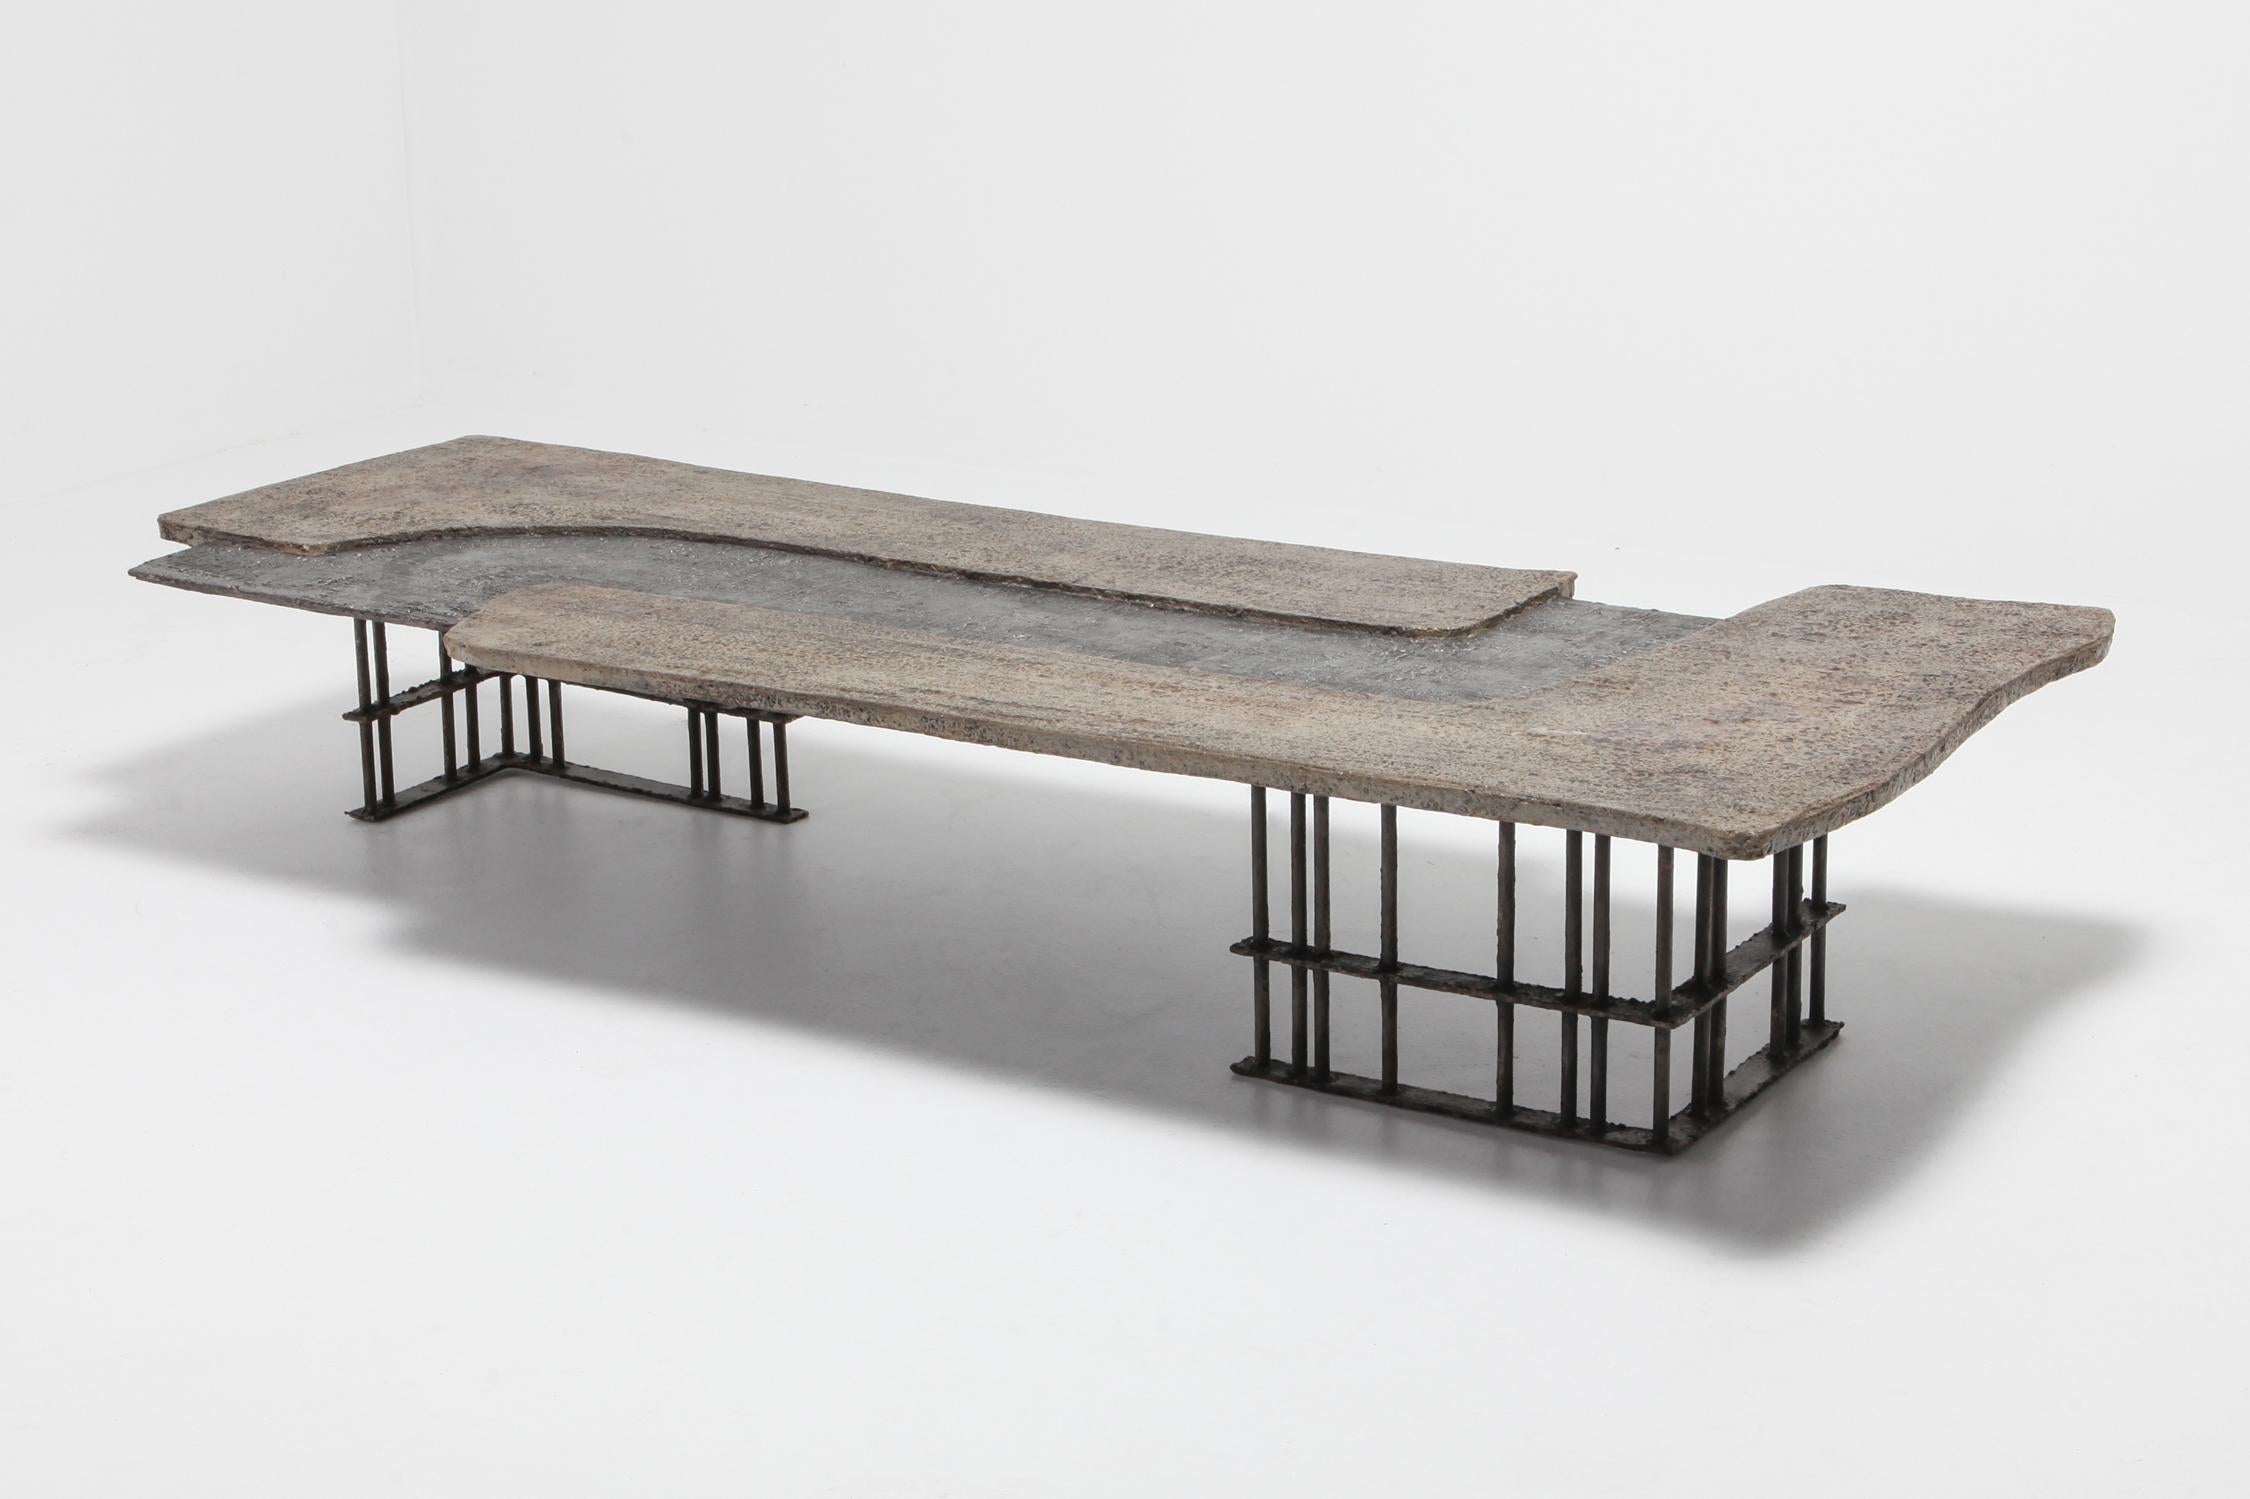 Collectible Brutalist coffee table, Jules Dewaele, Pia Manu, Belgium 1970s

Slate, concrete and cast aluminum top on forged iron base
This is a unique piece with complete authenticity report available from the son of Jules Dewaele. A True high